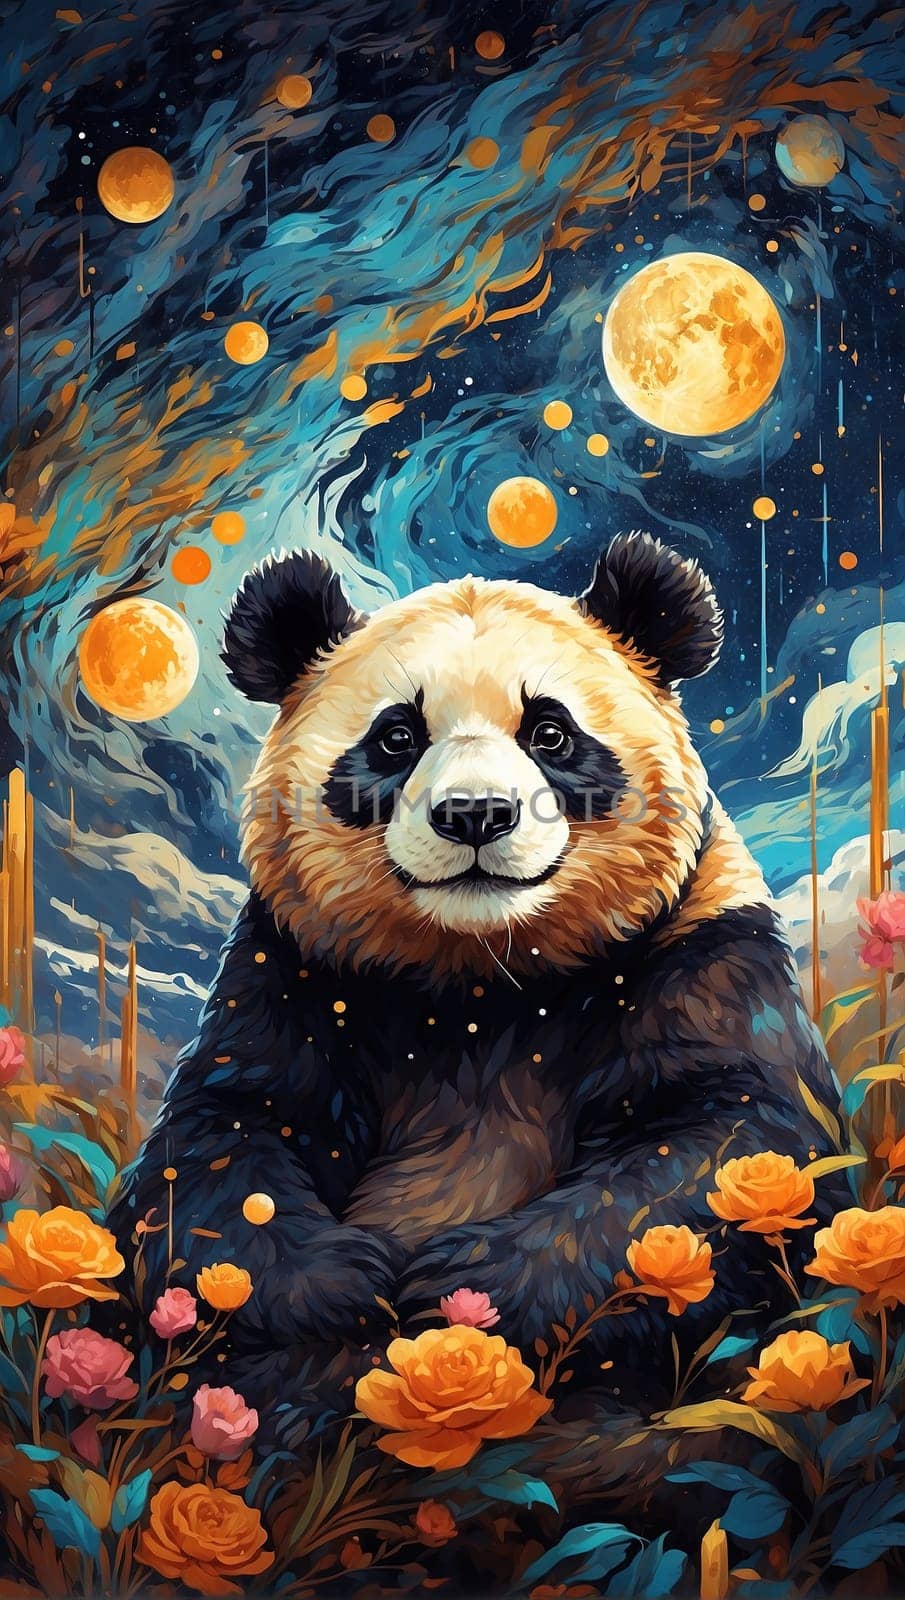 Illustration of a panda in the forest at night with full moon by Waseem-Creations